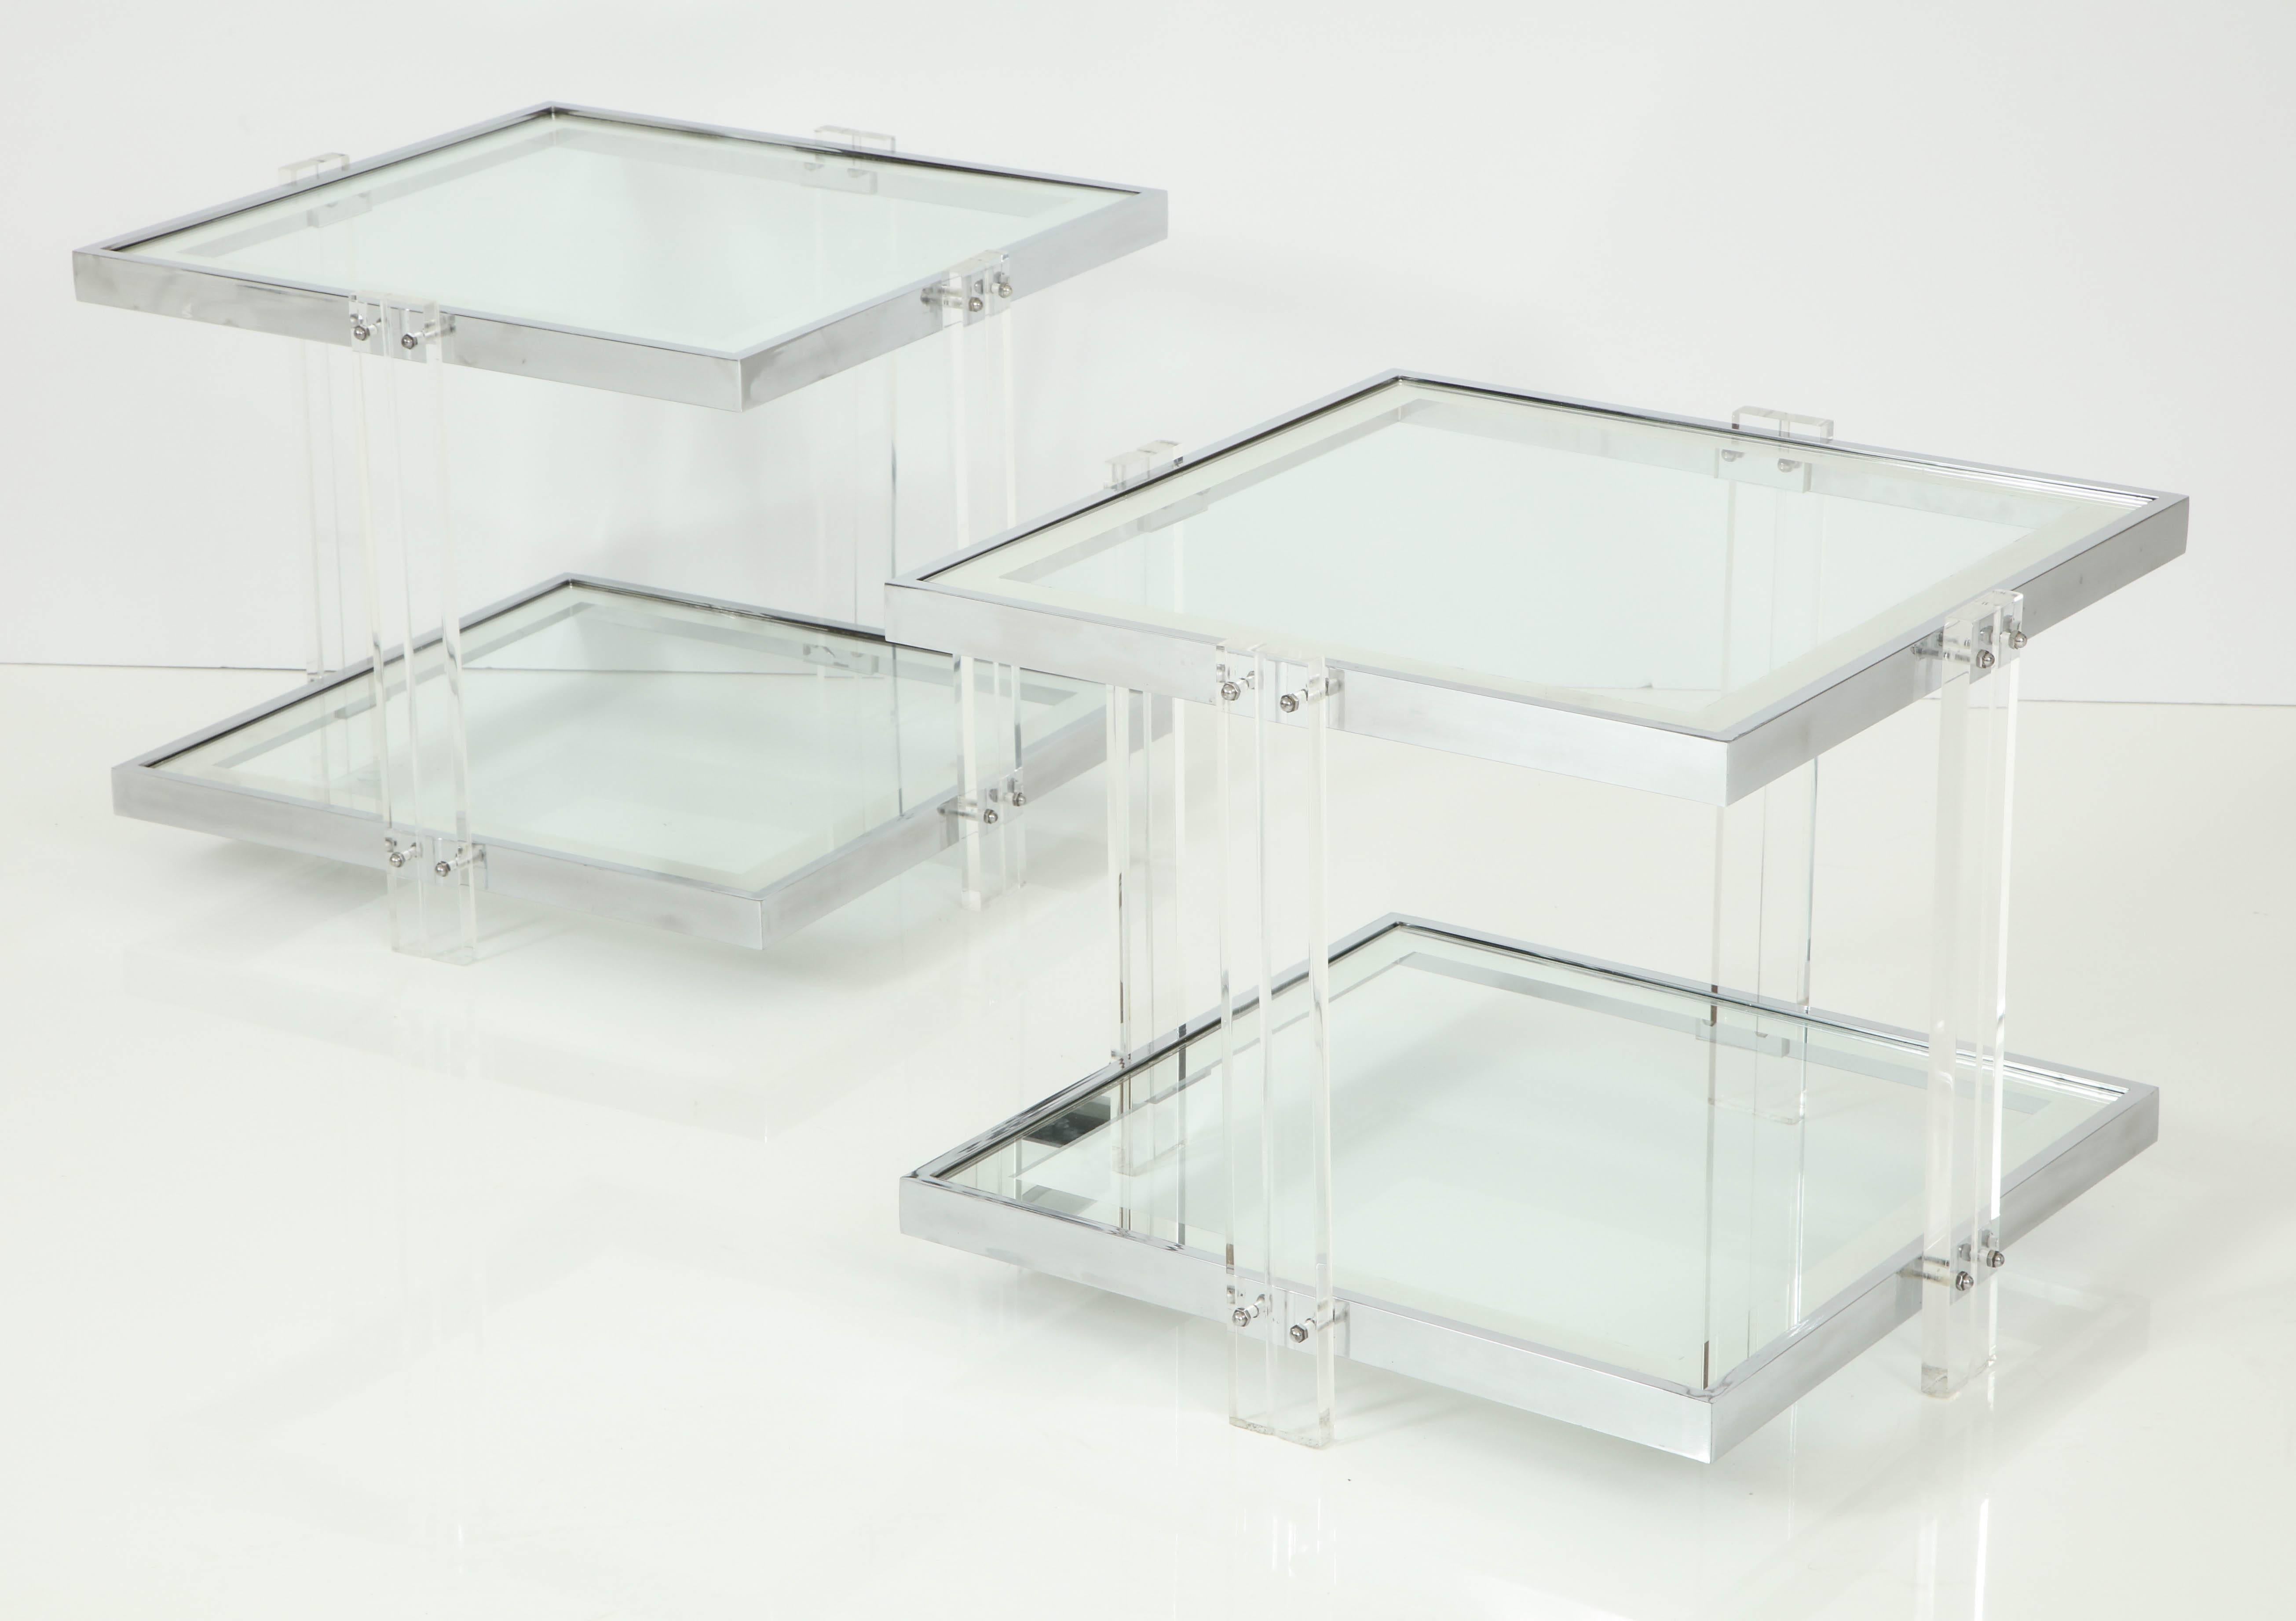 Pair of decorative side tables, circa 1950. Designed in Lucite with polished chrome details. Glass shelves have 1.5